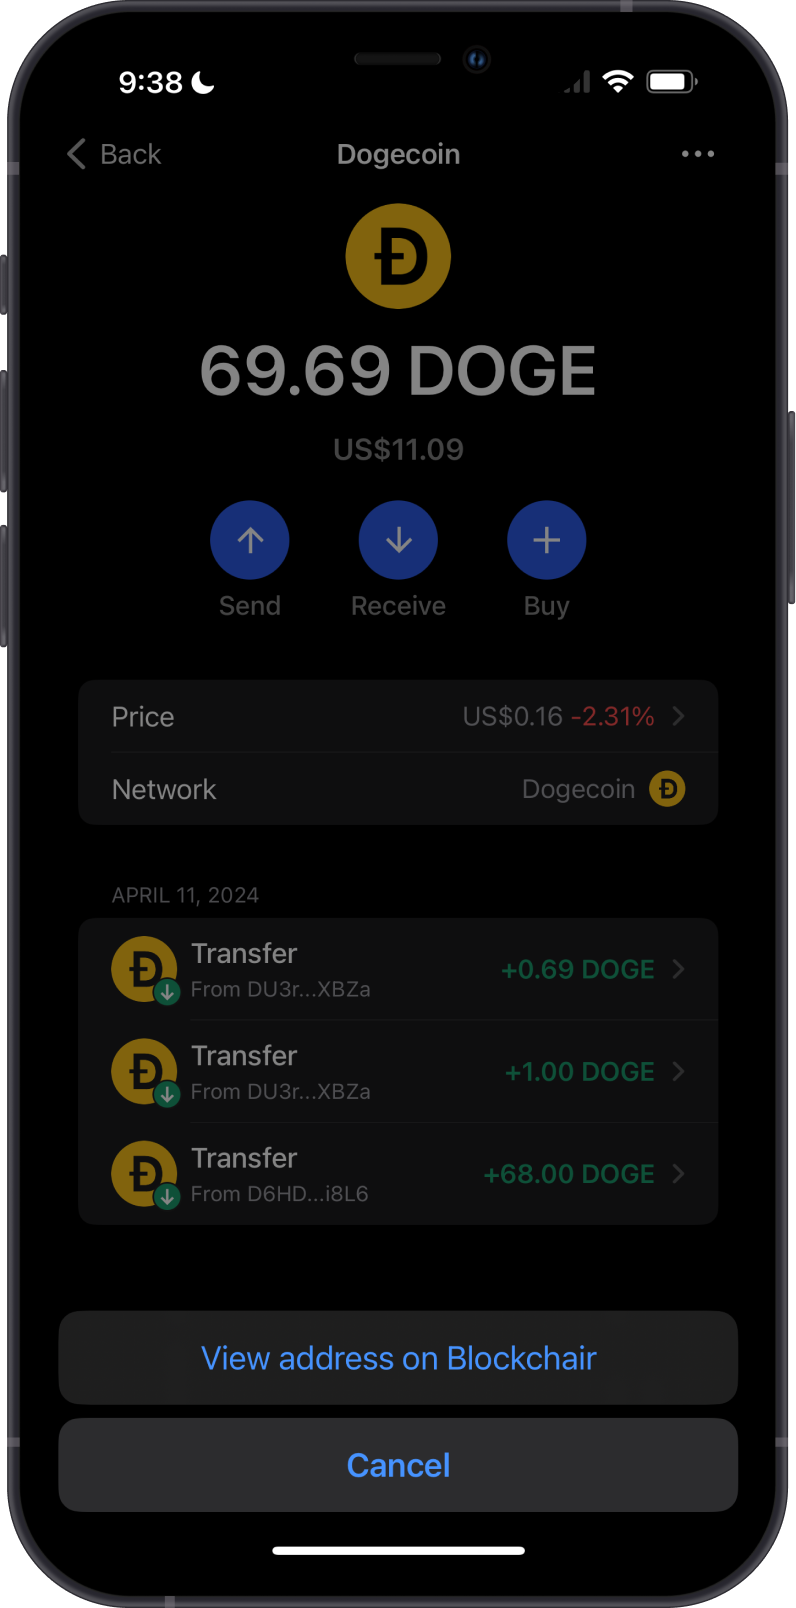 View Dogecoin on Blockchair Link